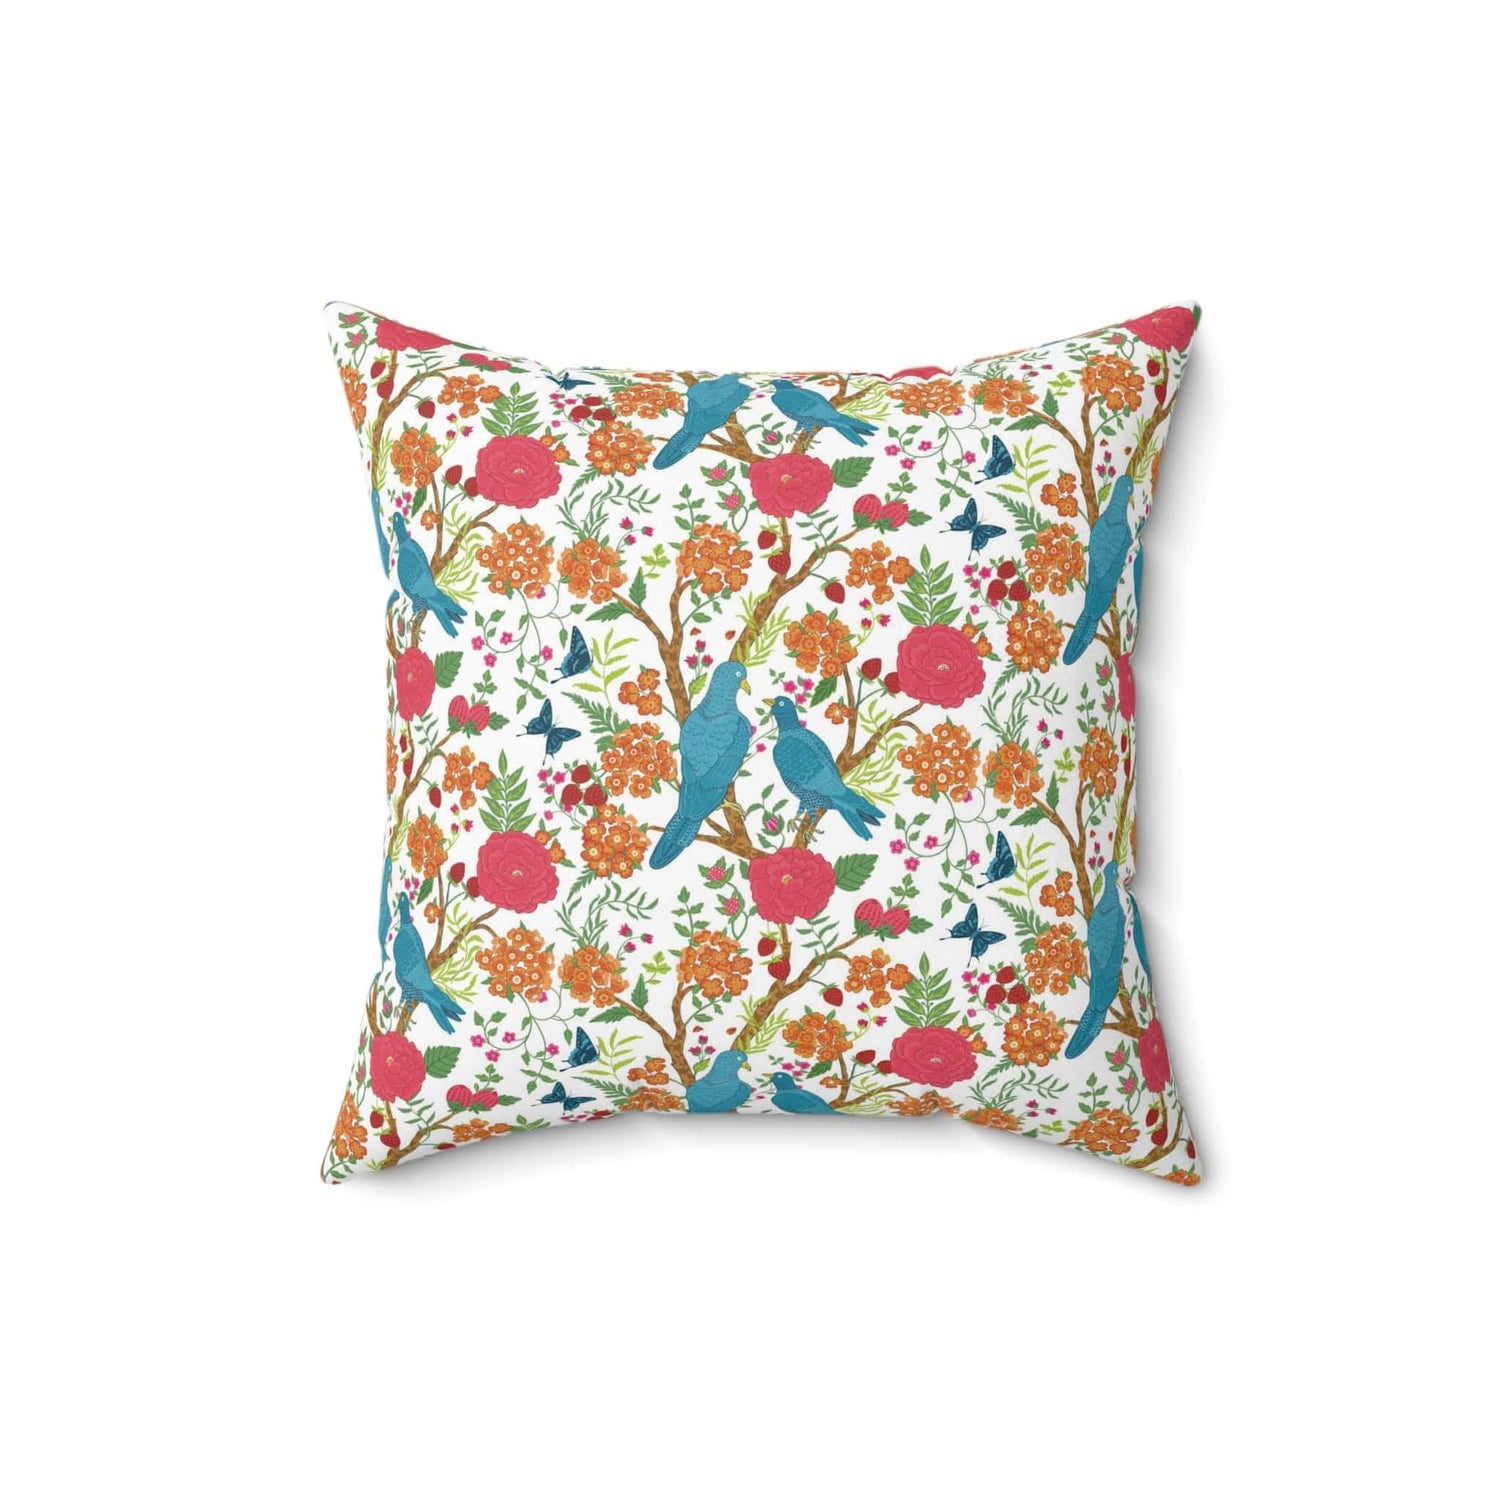 Kate McEnroe New York Chinoiserie Tropical Bird Garden Pillow with Insert, Floral Cushion, Botanical Bird Throw Pillow KM13809924Throw Pillows19410426217914575606